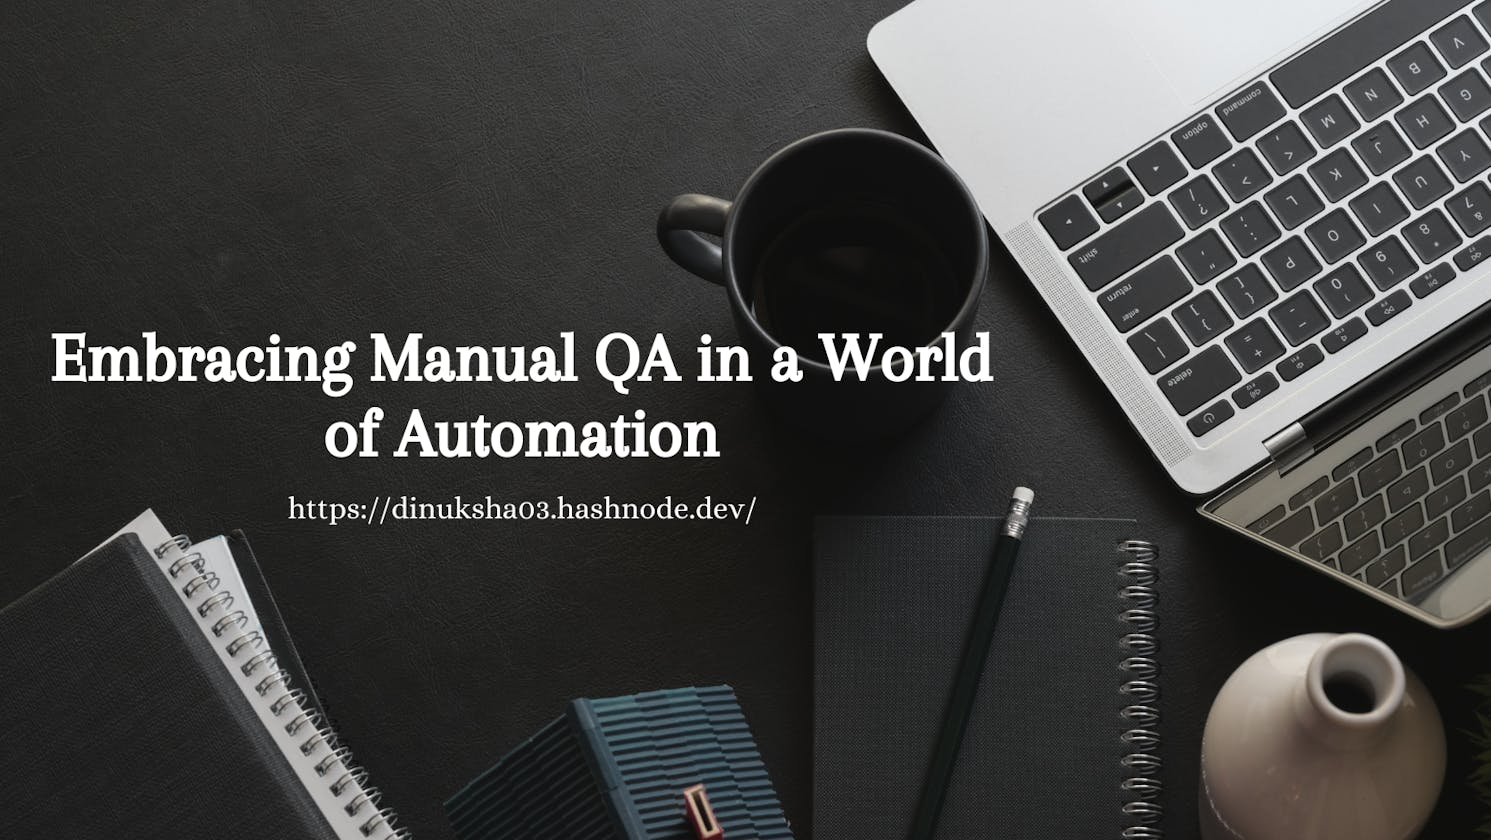 Embracing Manual QA in a World of Automation